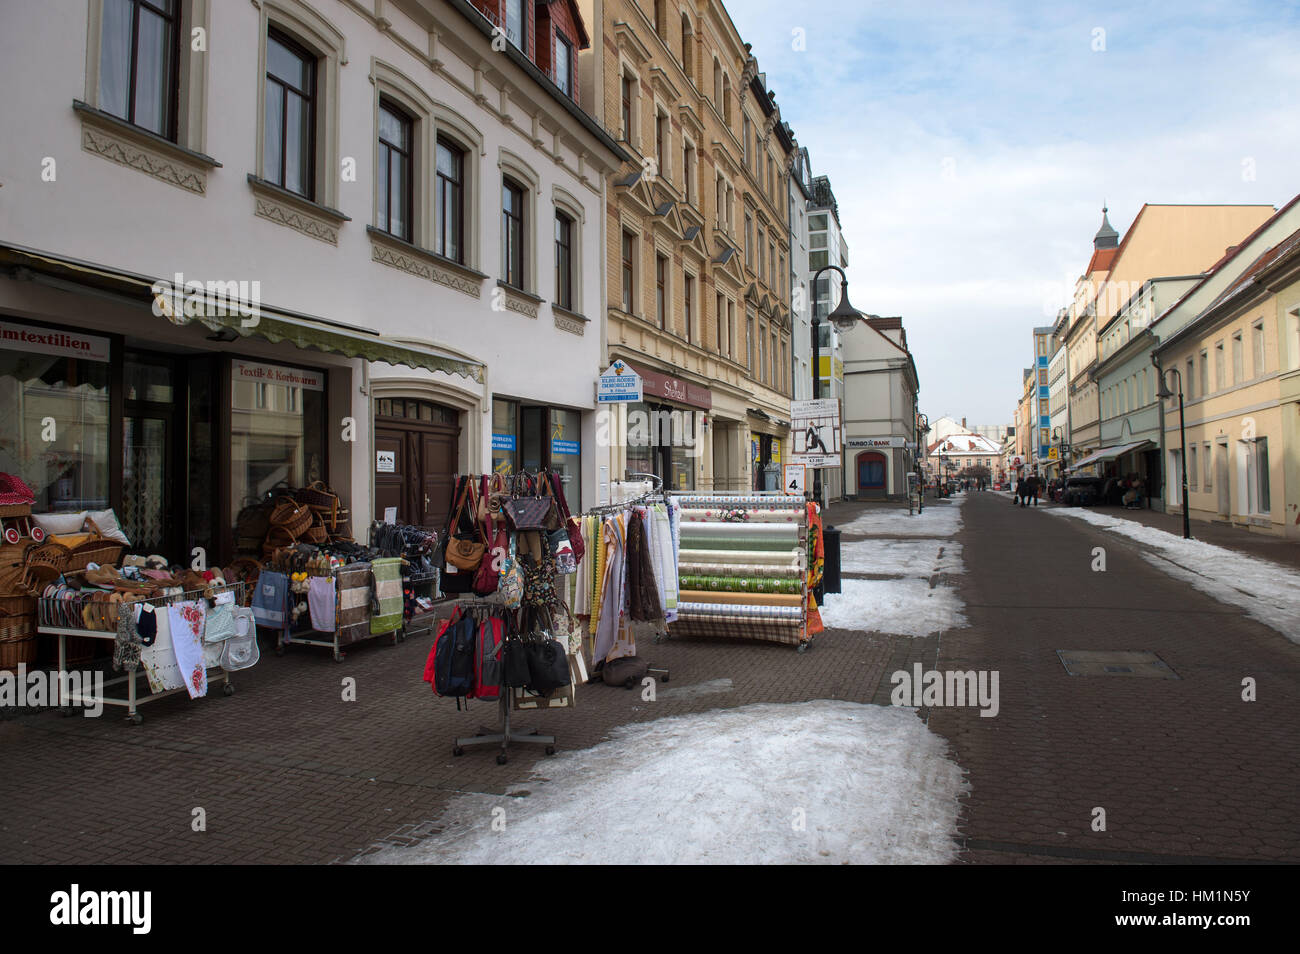 Riesa, Germany. 30th Jan, 2017. The main thoroughfare in Riesa, Germany.  Riesa is situated on the Elbe river but retains a certain remoteness. The city is in the middle of a period of renewal having shed its former roles as steel and sports city. But which new image will suit it? Credit: dpa/Alamy Live News Stock Photo